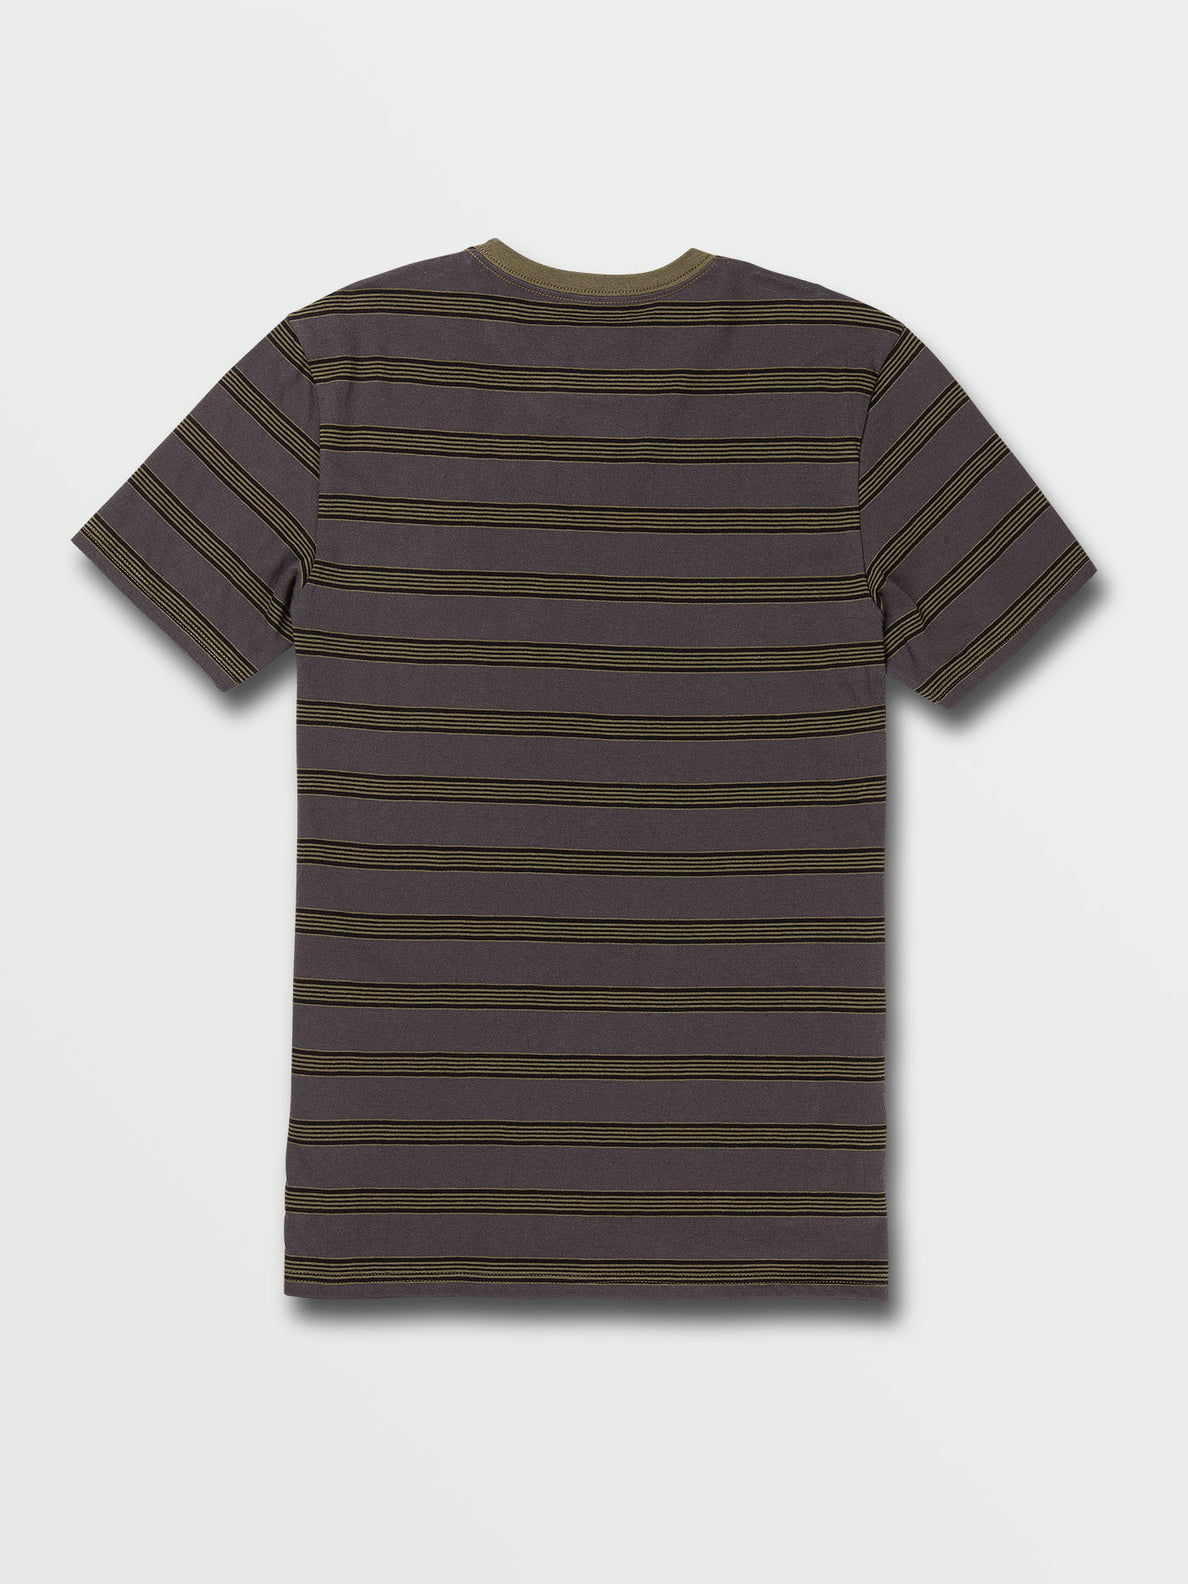 Parables Stripes Crew Tee - Military (A0102100_MIL) [B]